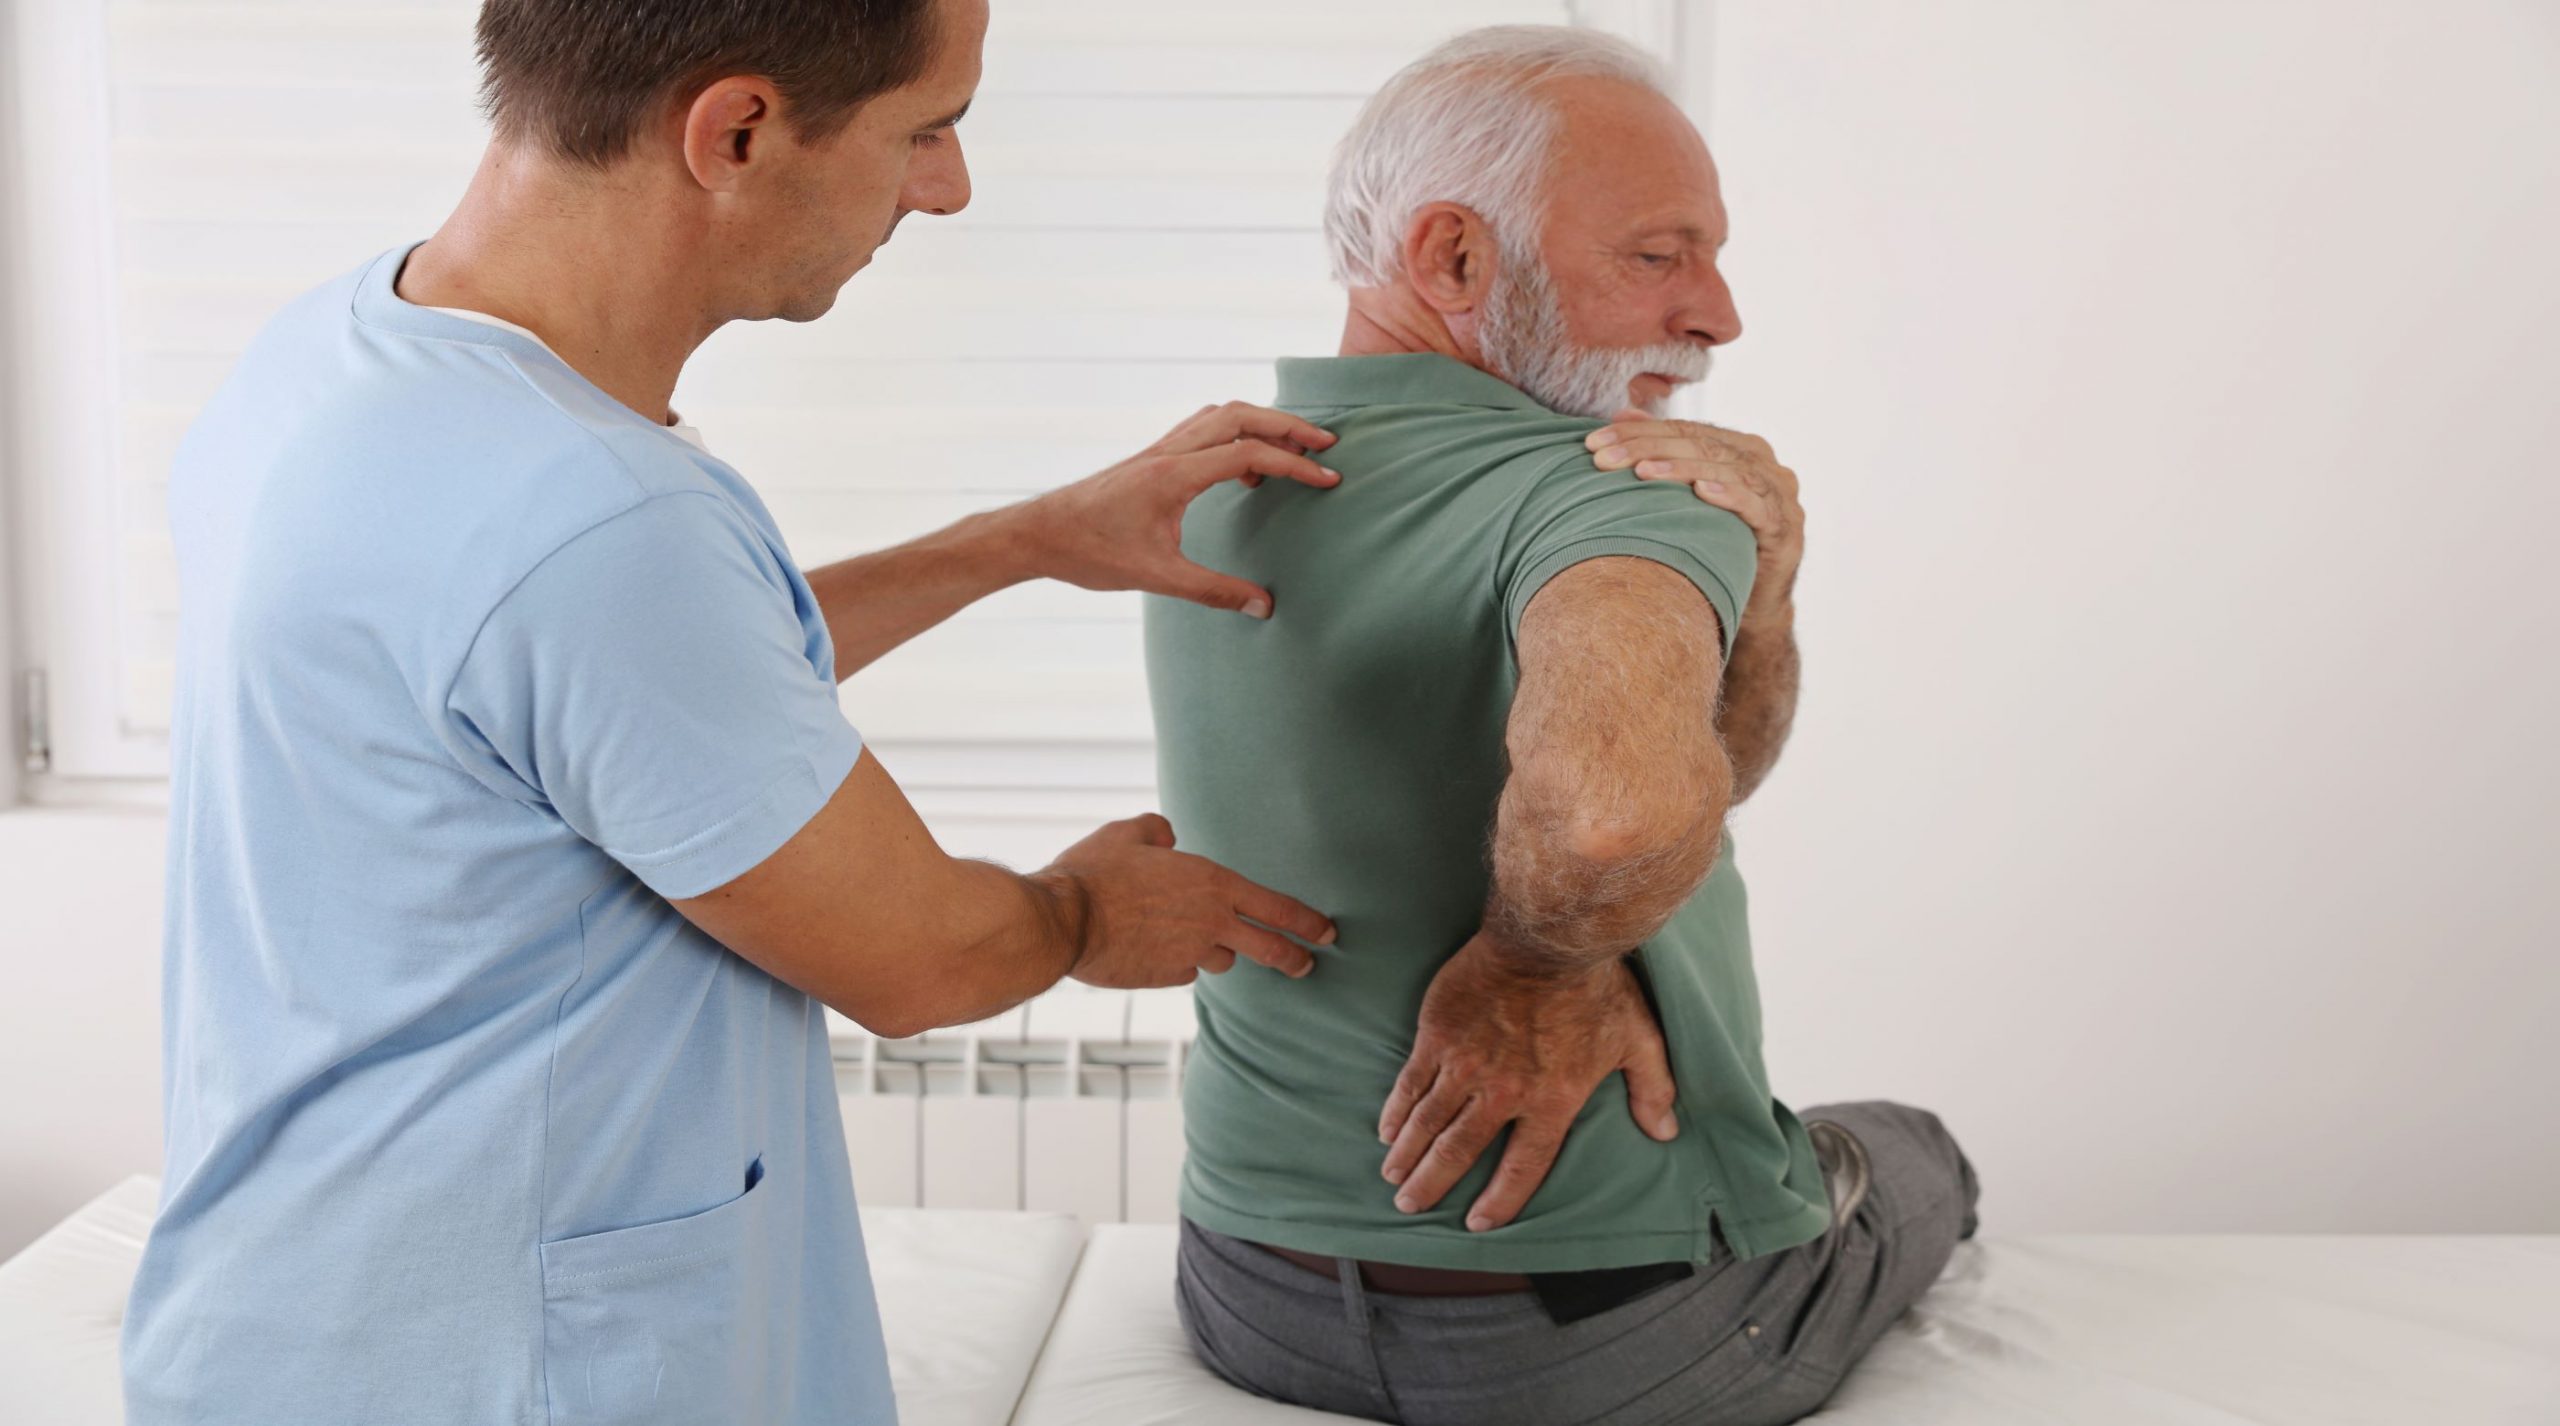 Posture Imbalances lead to spine and shoulder pain: Recognition and treatment